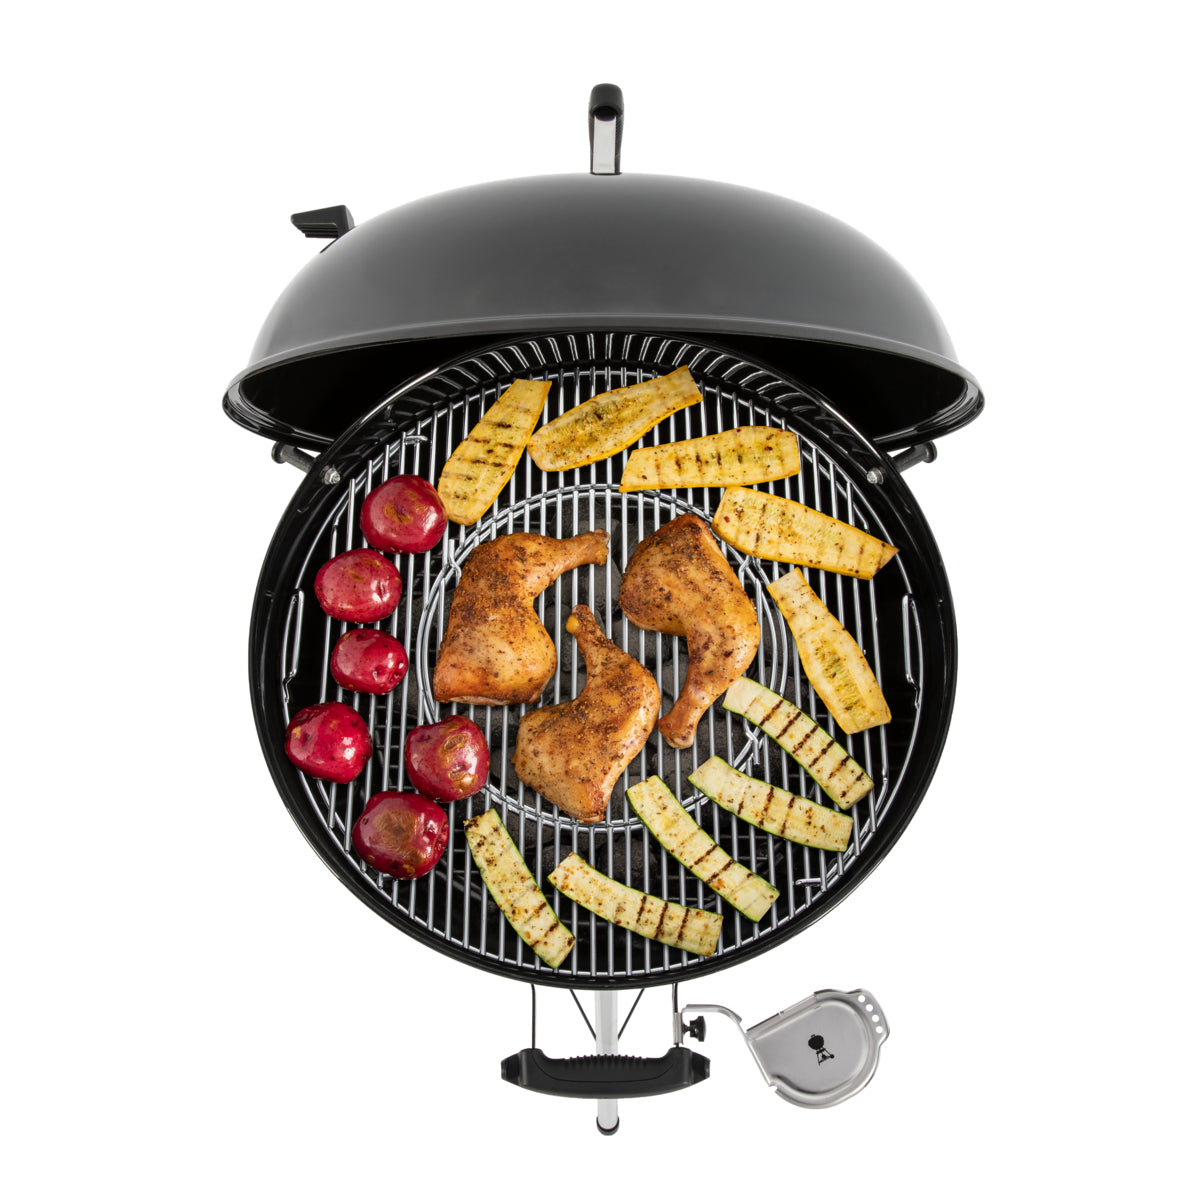 Master-Touch GBS E-5750 Charcoal Barbecue 57 cm - Deep Ocean Blue